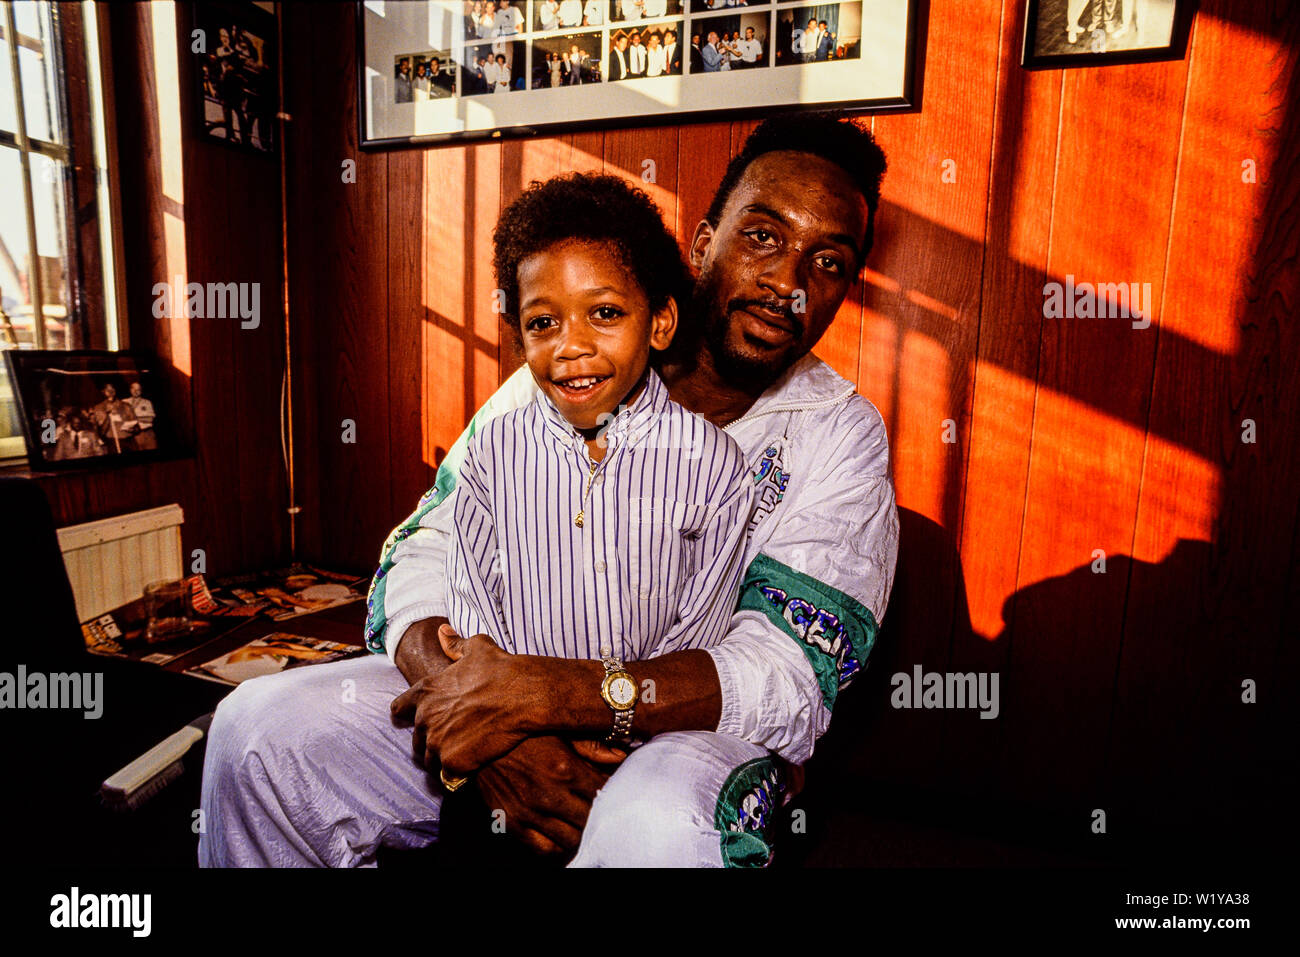 London, 1990. Portrait of boxer Nigel Benn with his son Dominic. Nicknamed The Dark Destroyer, he held the WBO middleweight title in 1990, and the WBC Stock Photo